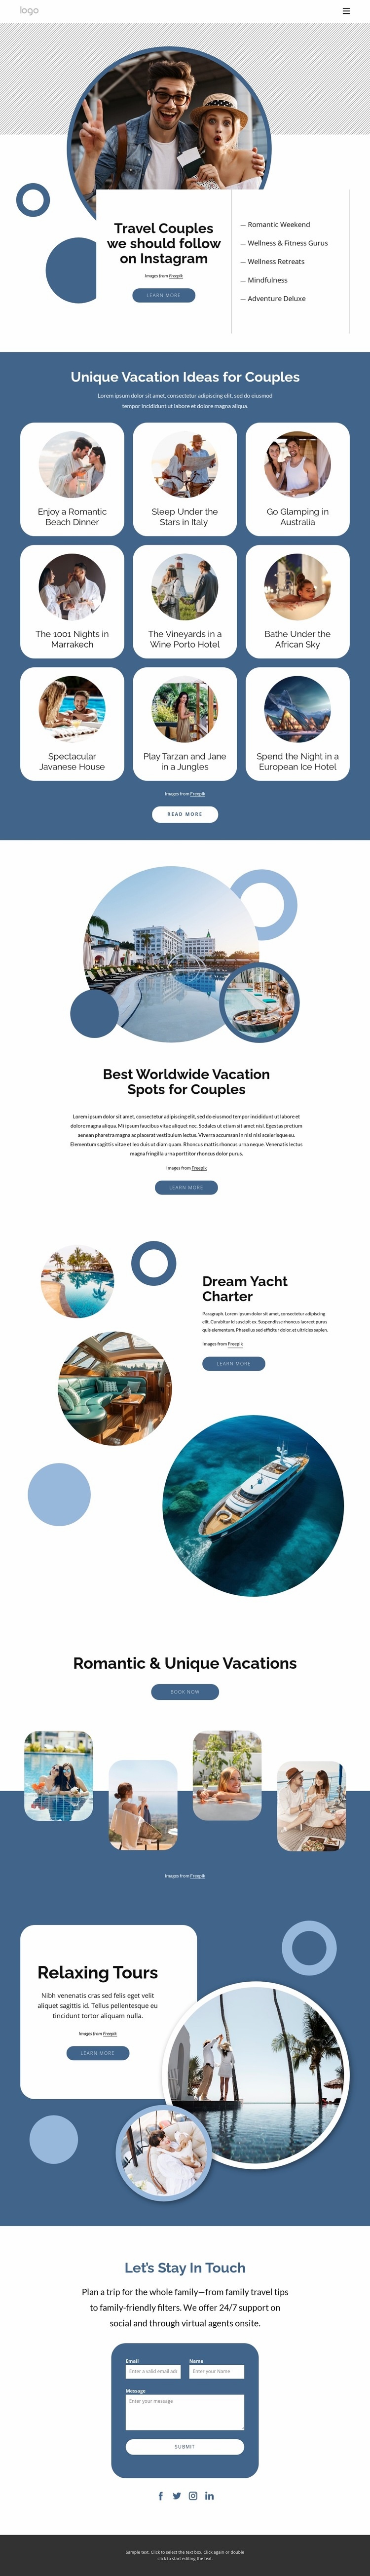 Imagine travelling to some of the most amazing places Homepage Design